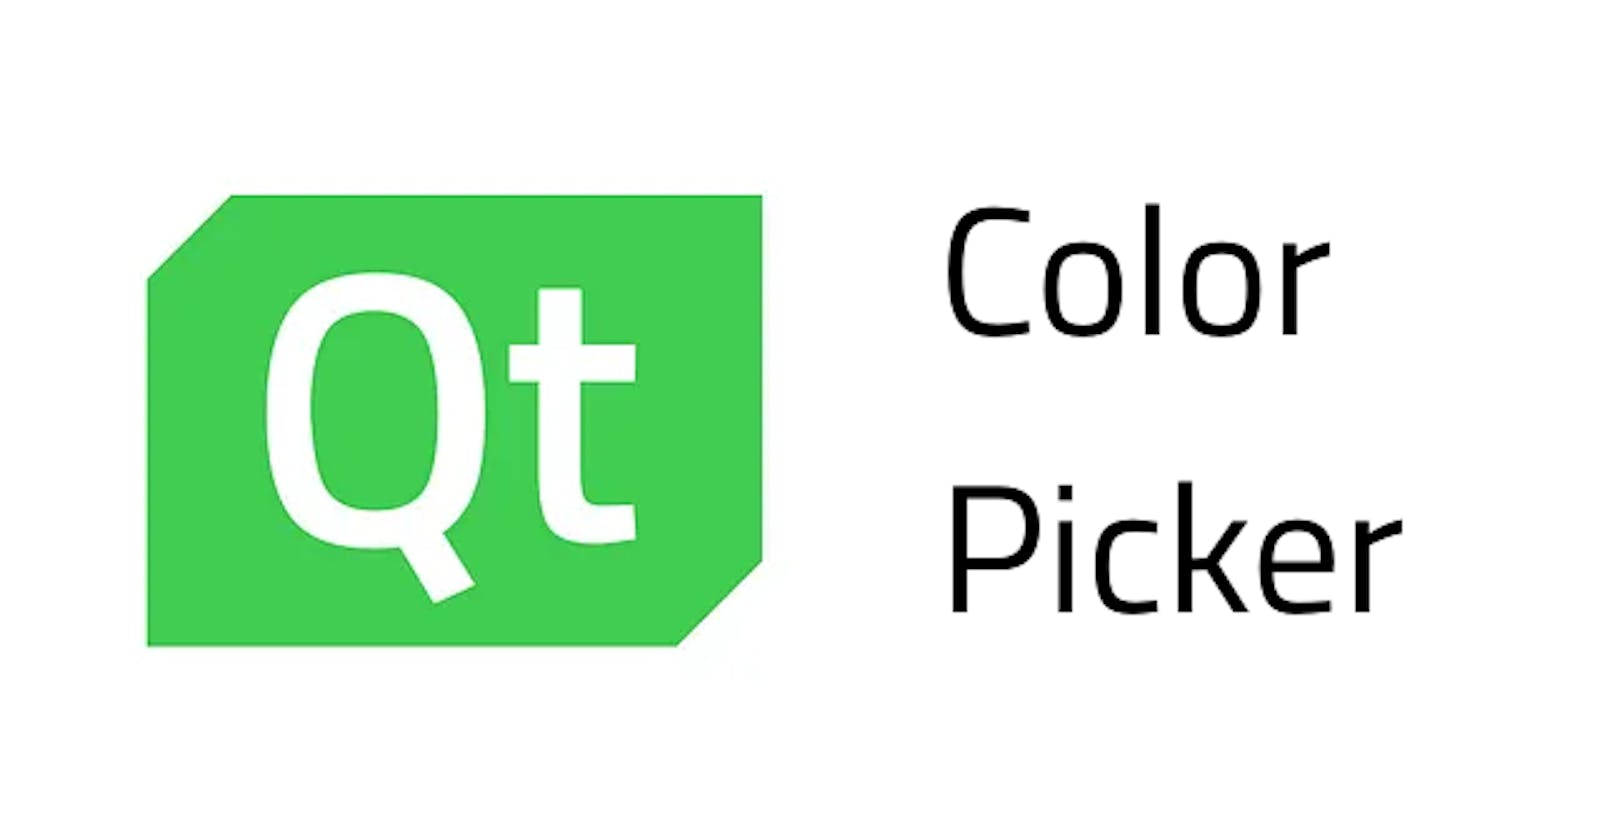 How to make a color picker using Qt